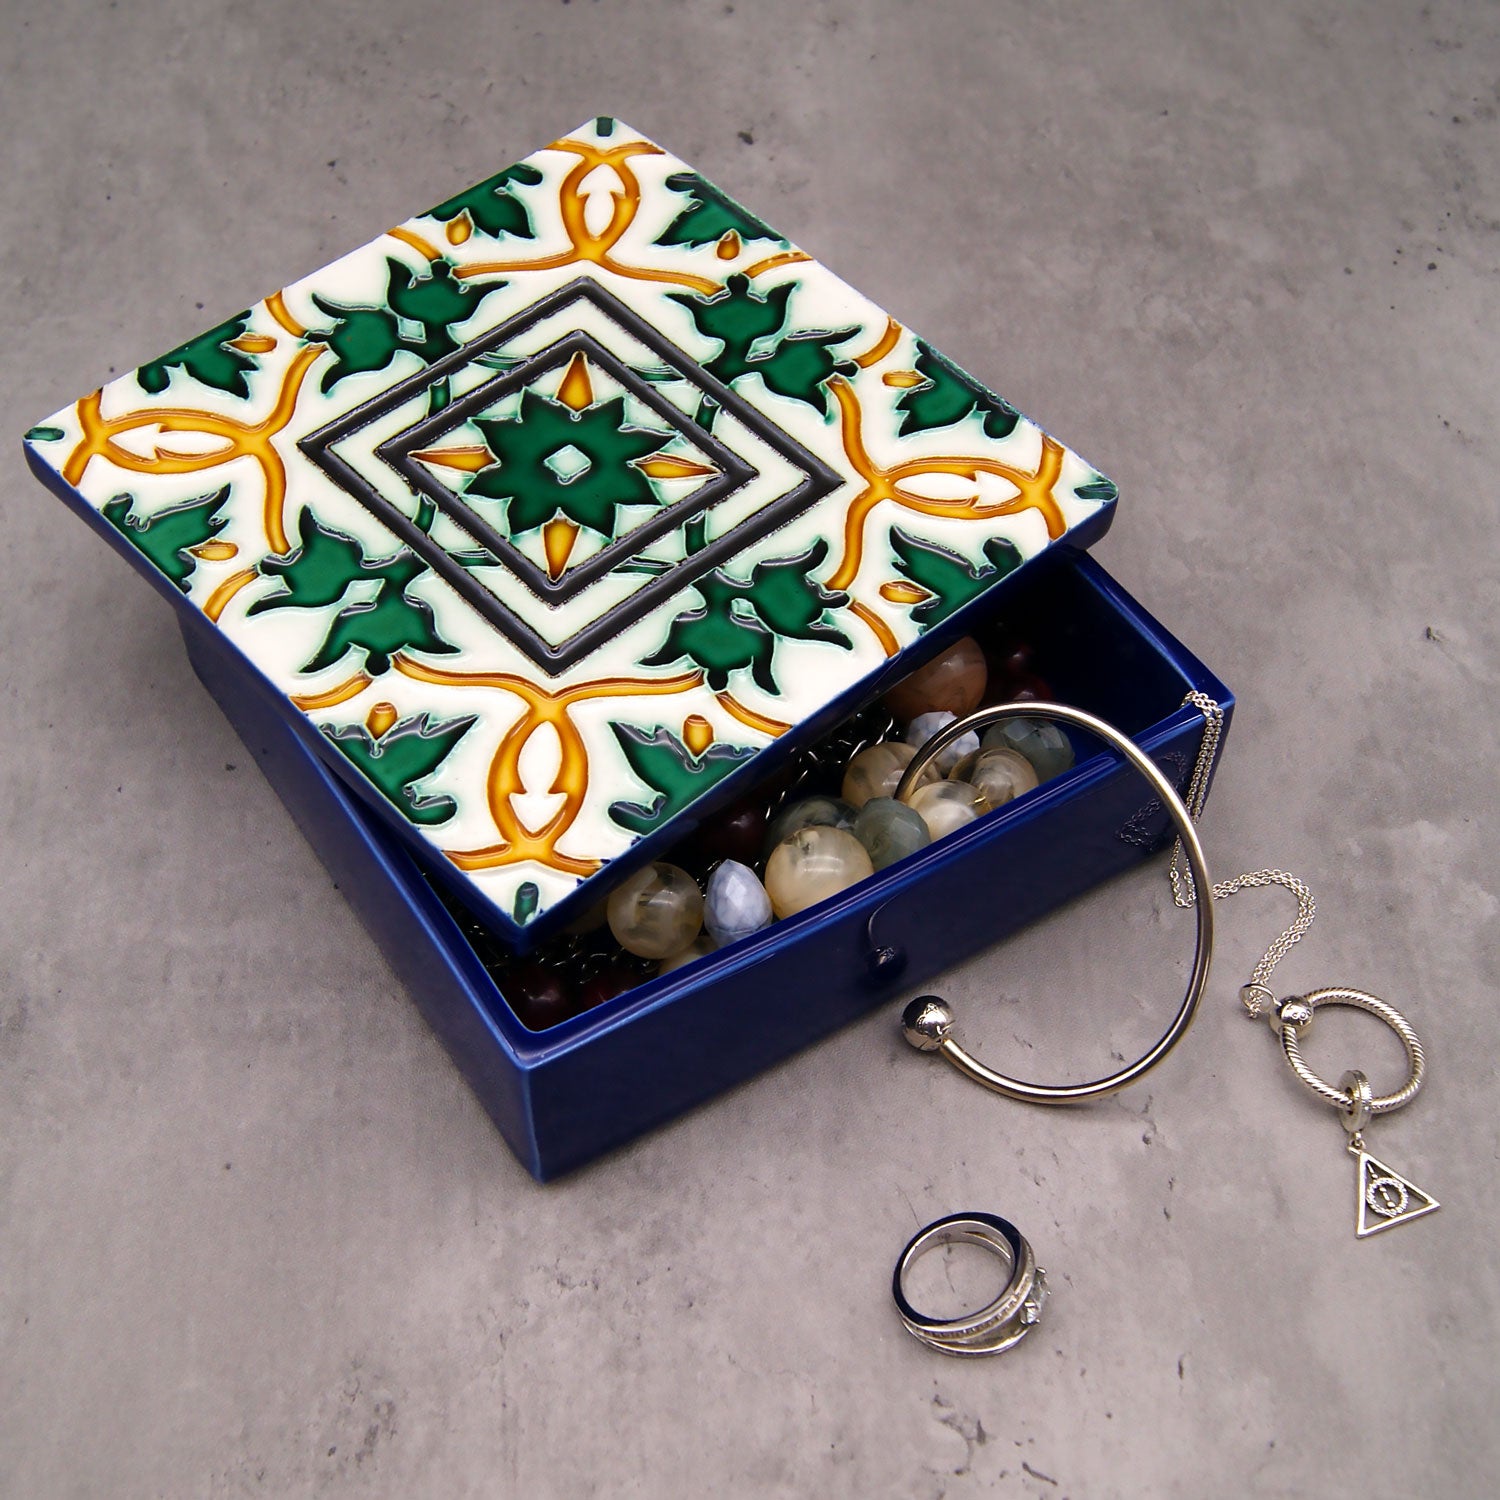 Hand Painted Portuguese Tiles Decorative Ceramic Box with Lid